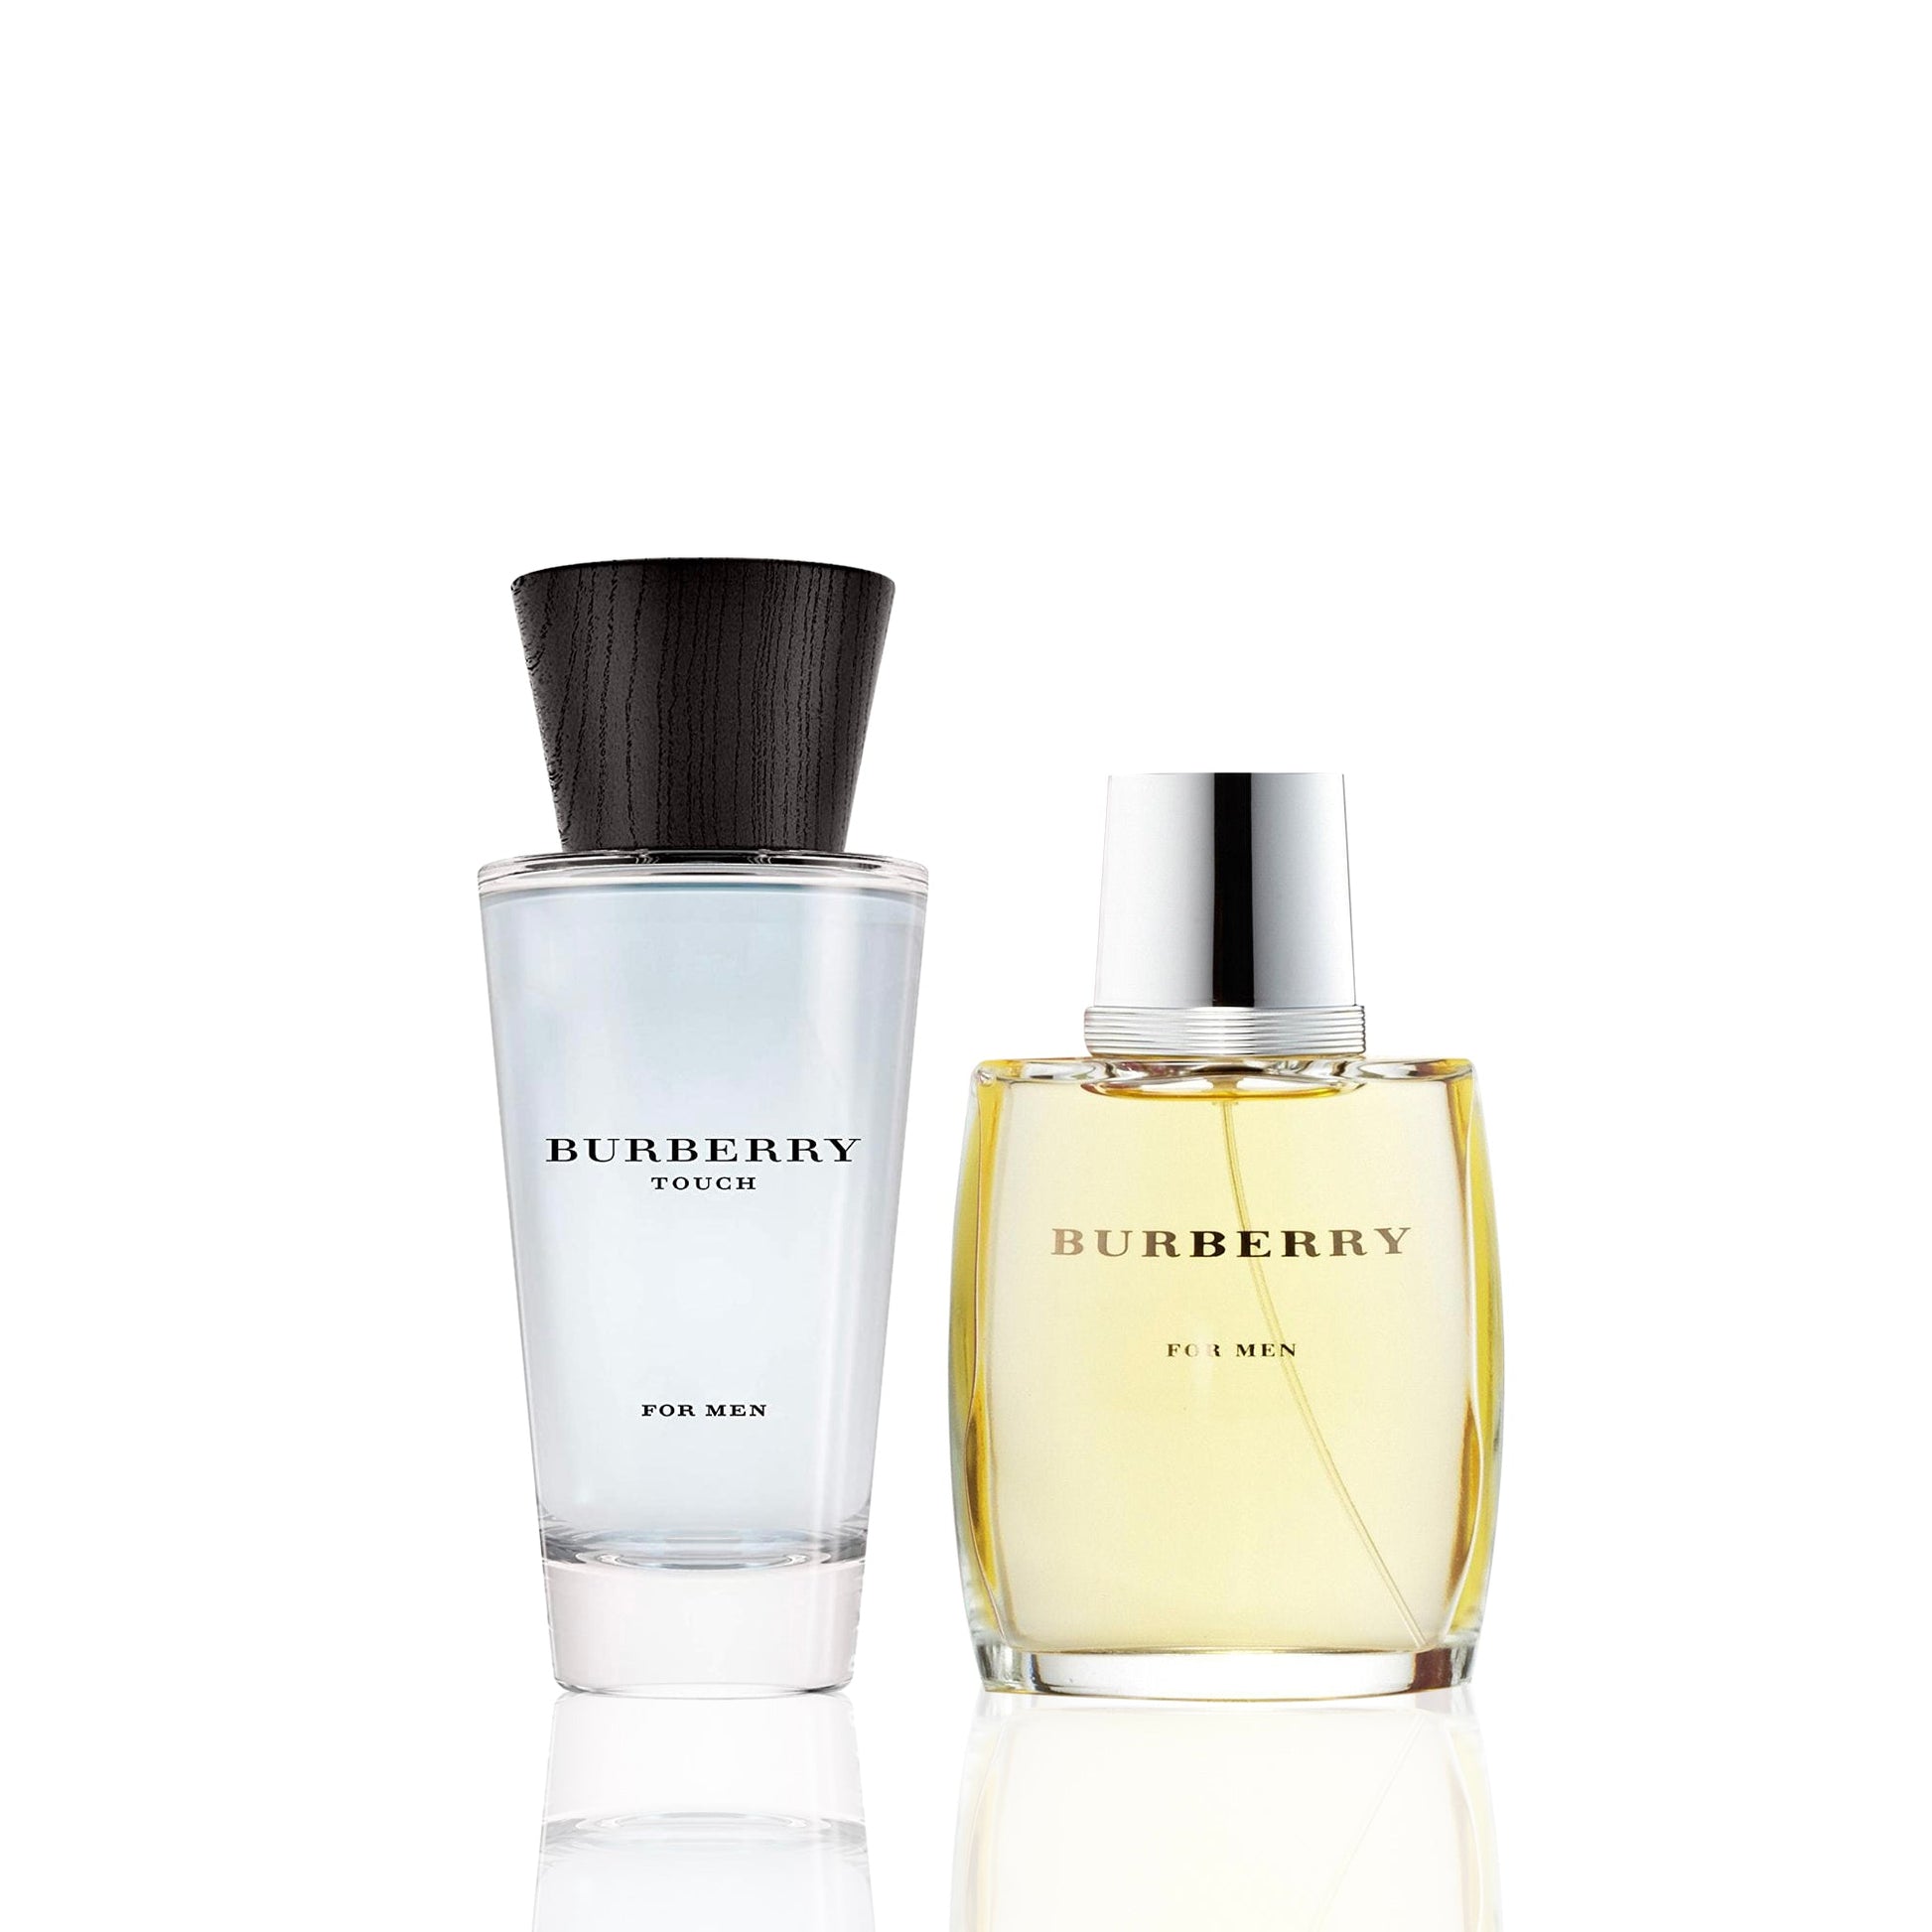 Bundle Deal For Men: Burberry Touch by Burberry and Burberry by Burberry, Product image 1